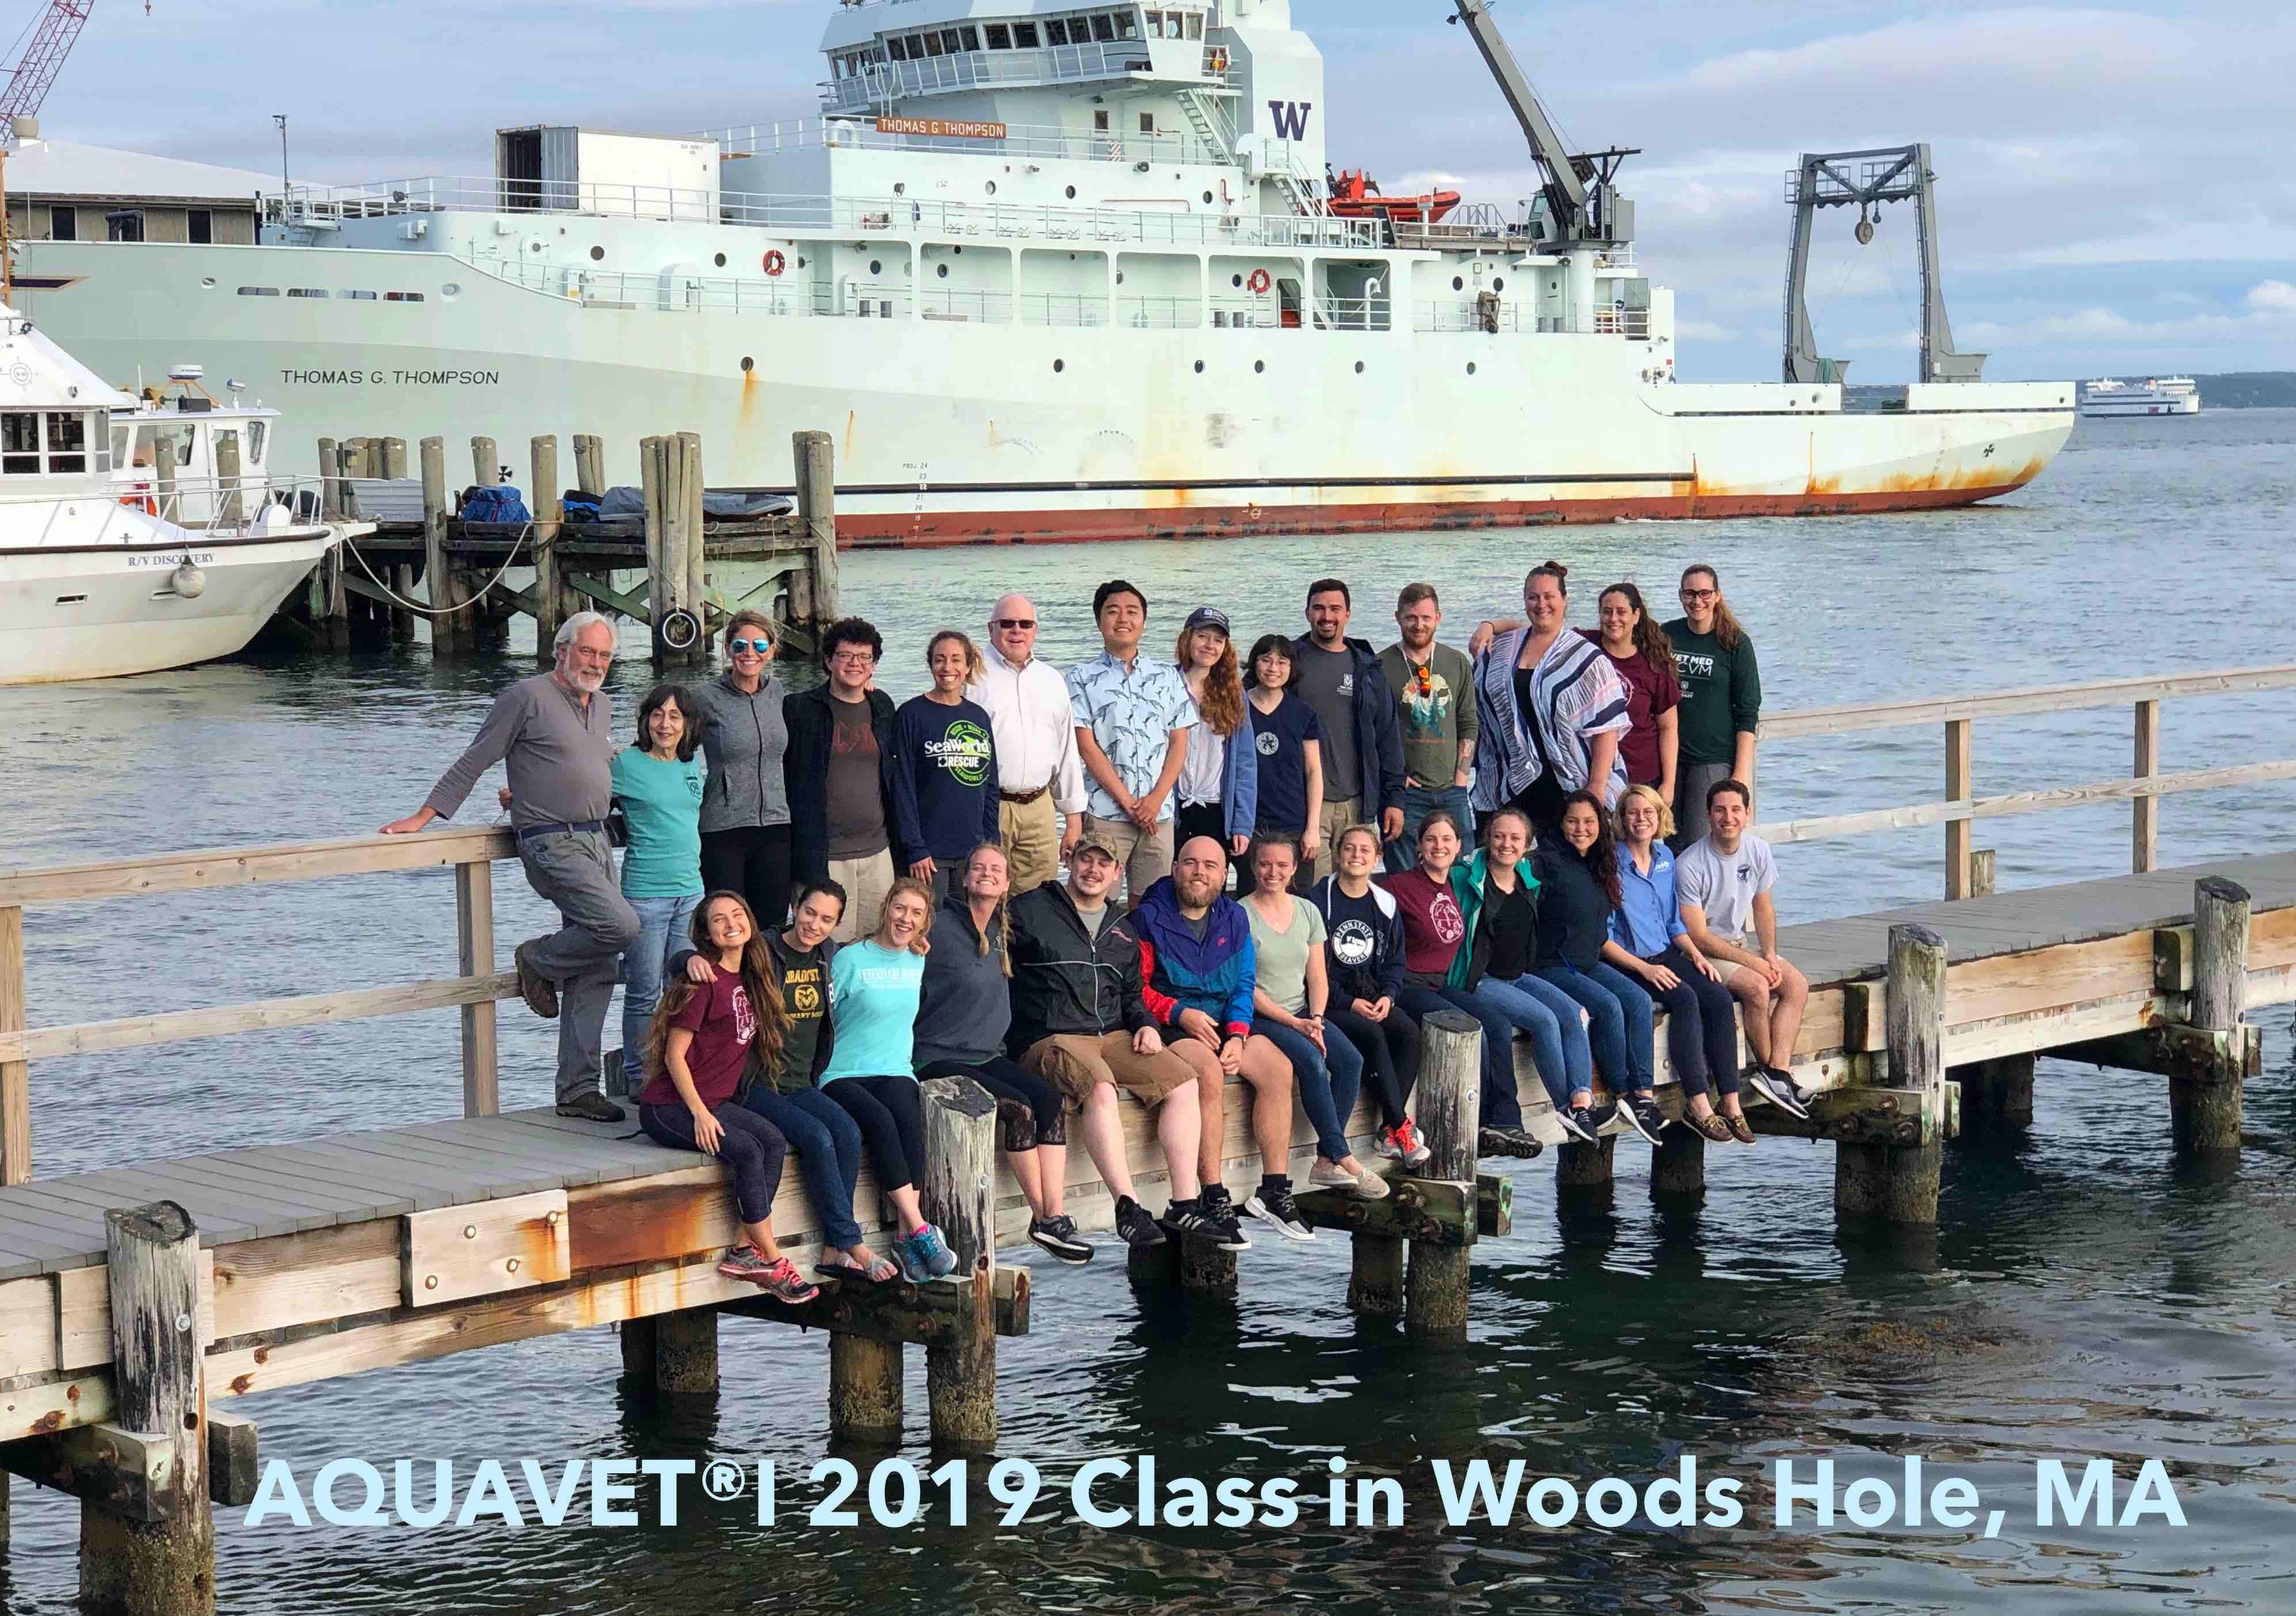 Aquavet I 2019 Class in Woods Hole Picture 2